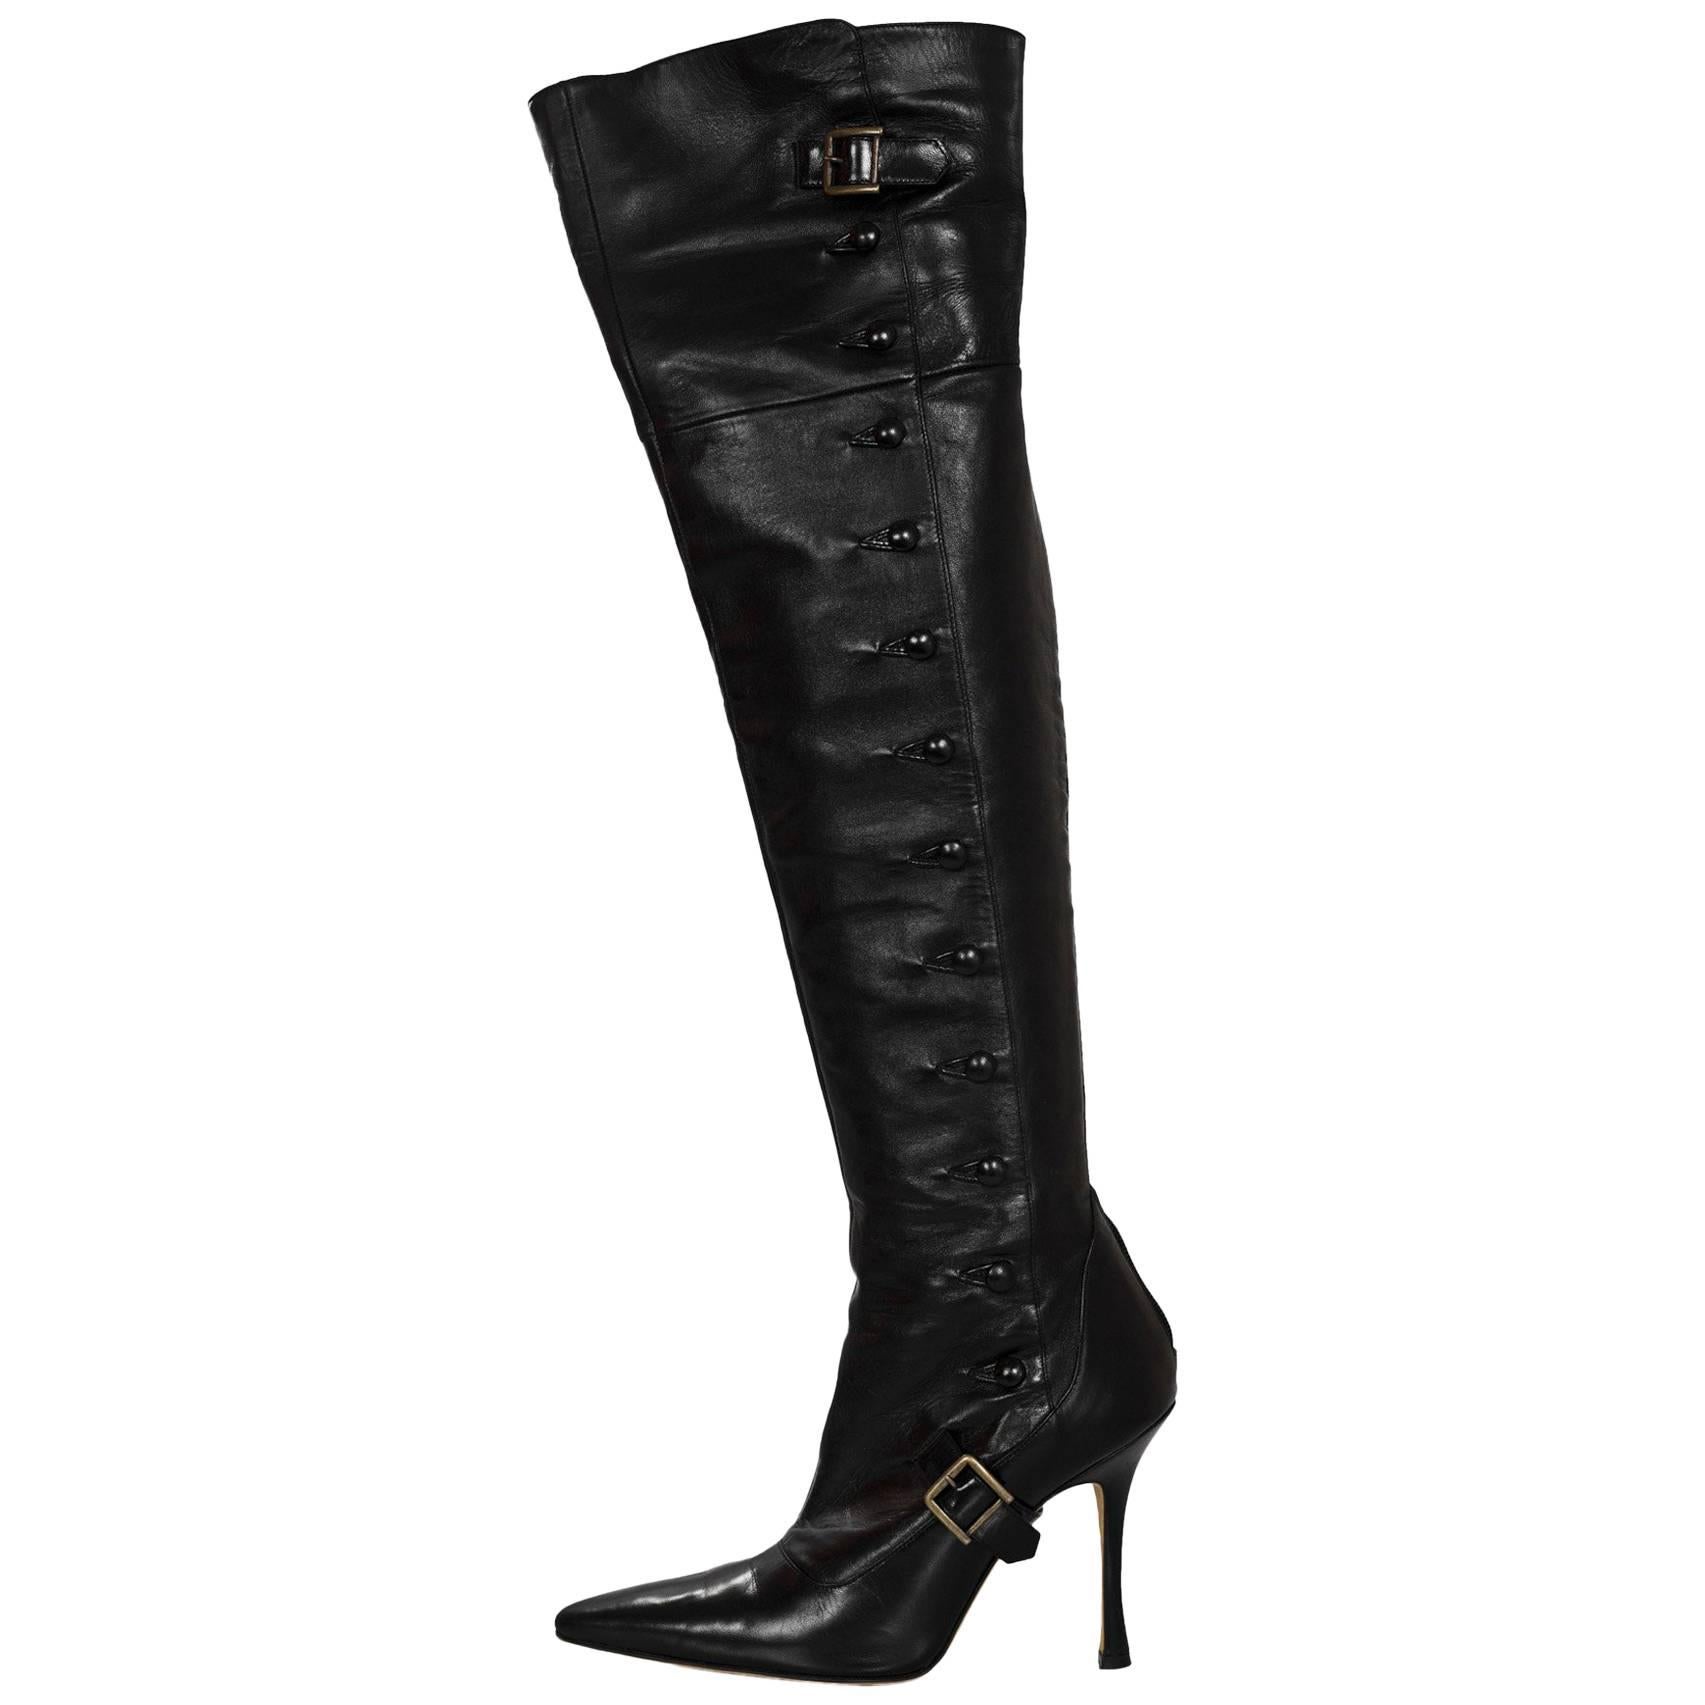 Manolo Blahnik Black Leather Over-The-Knee Boots Sz 37